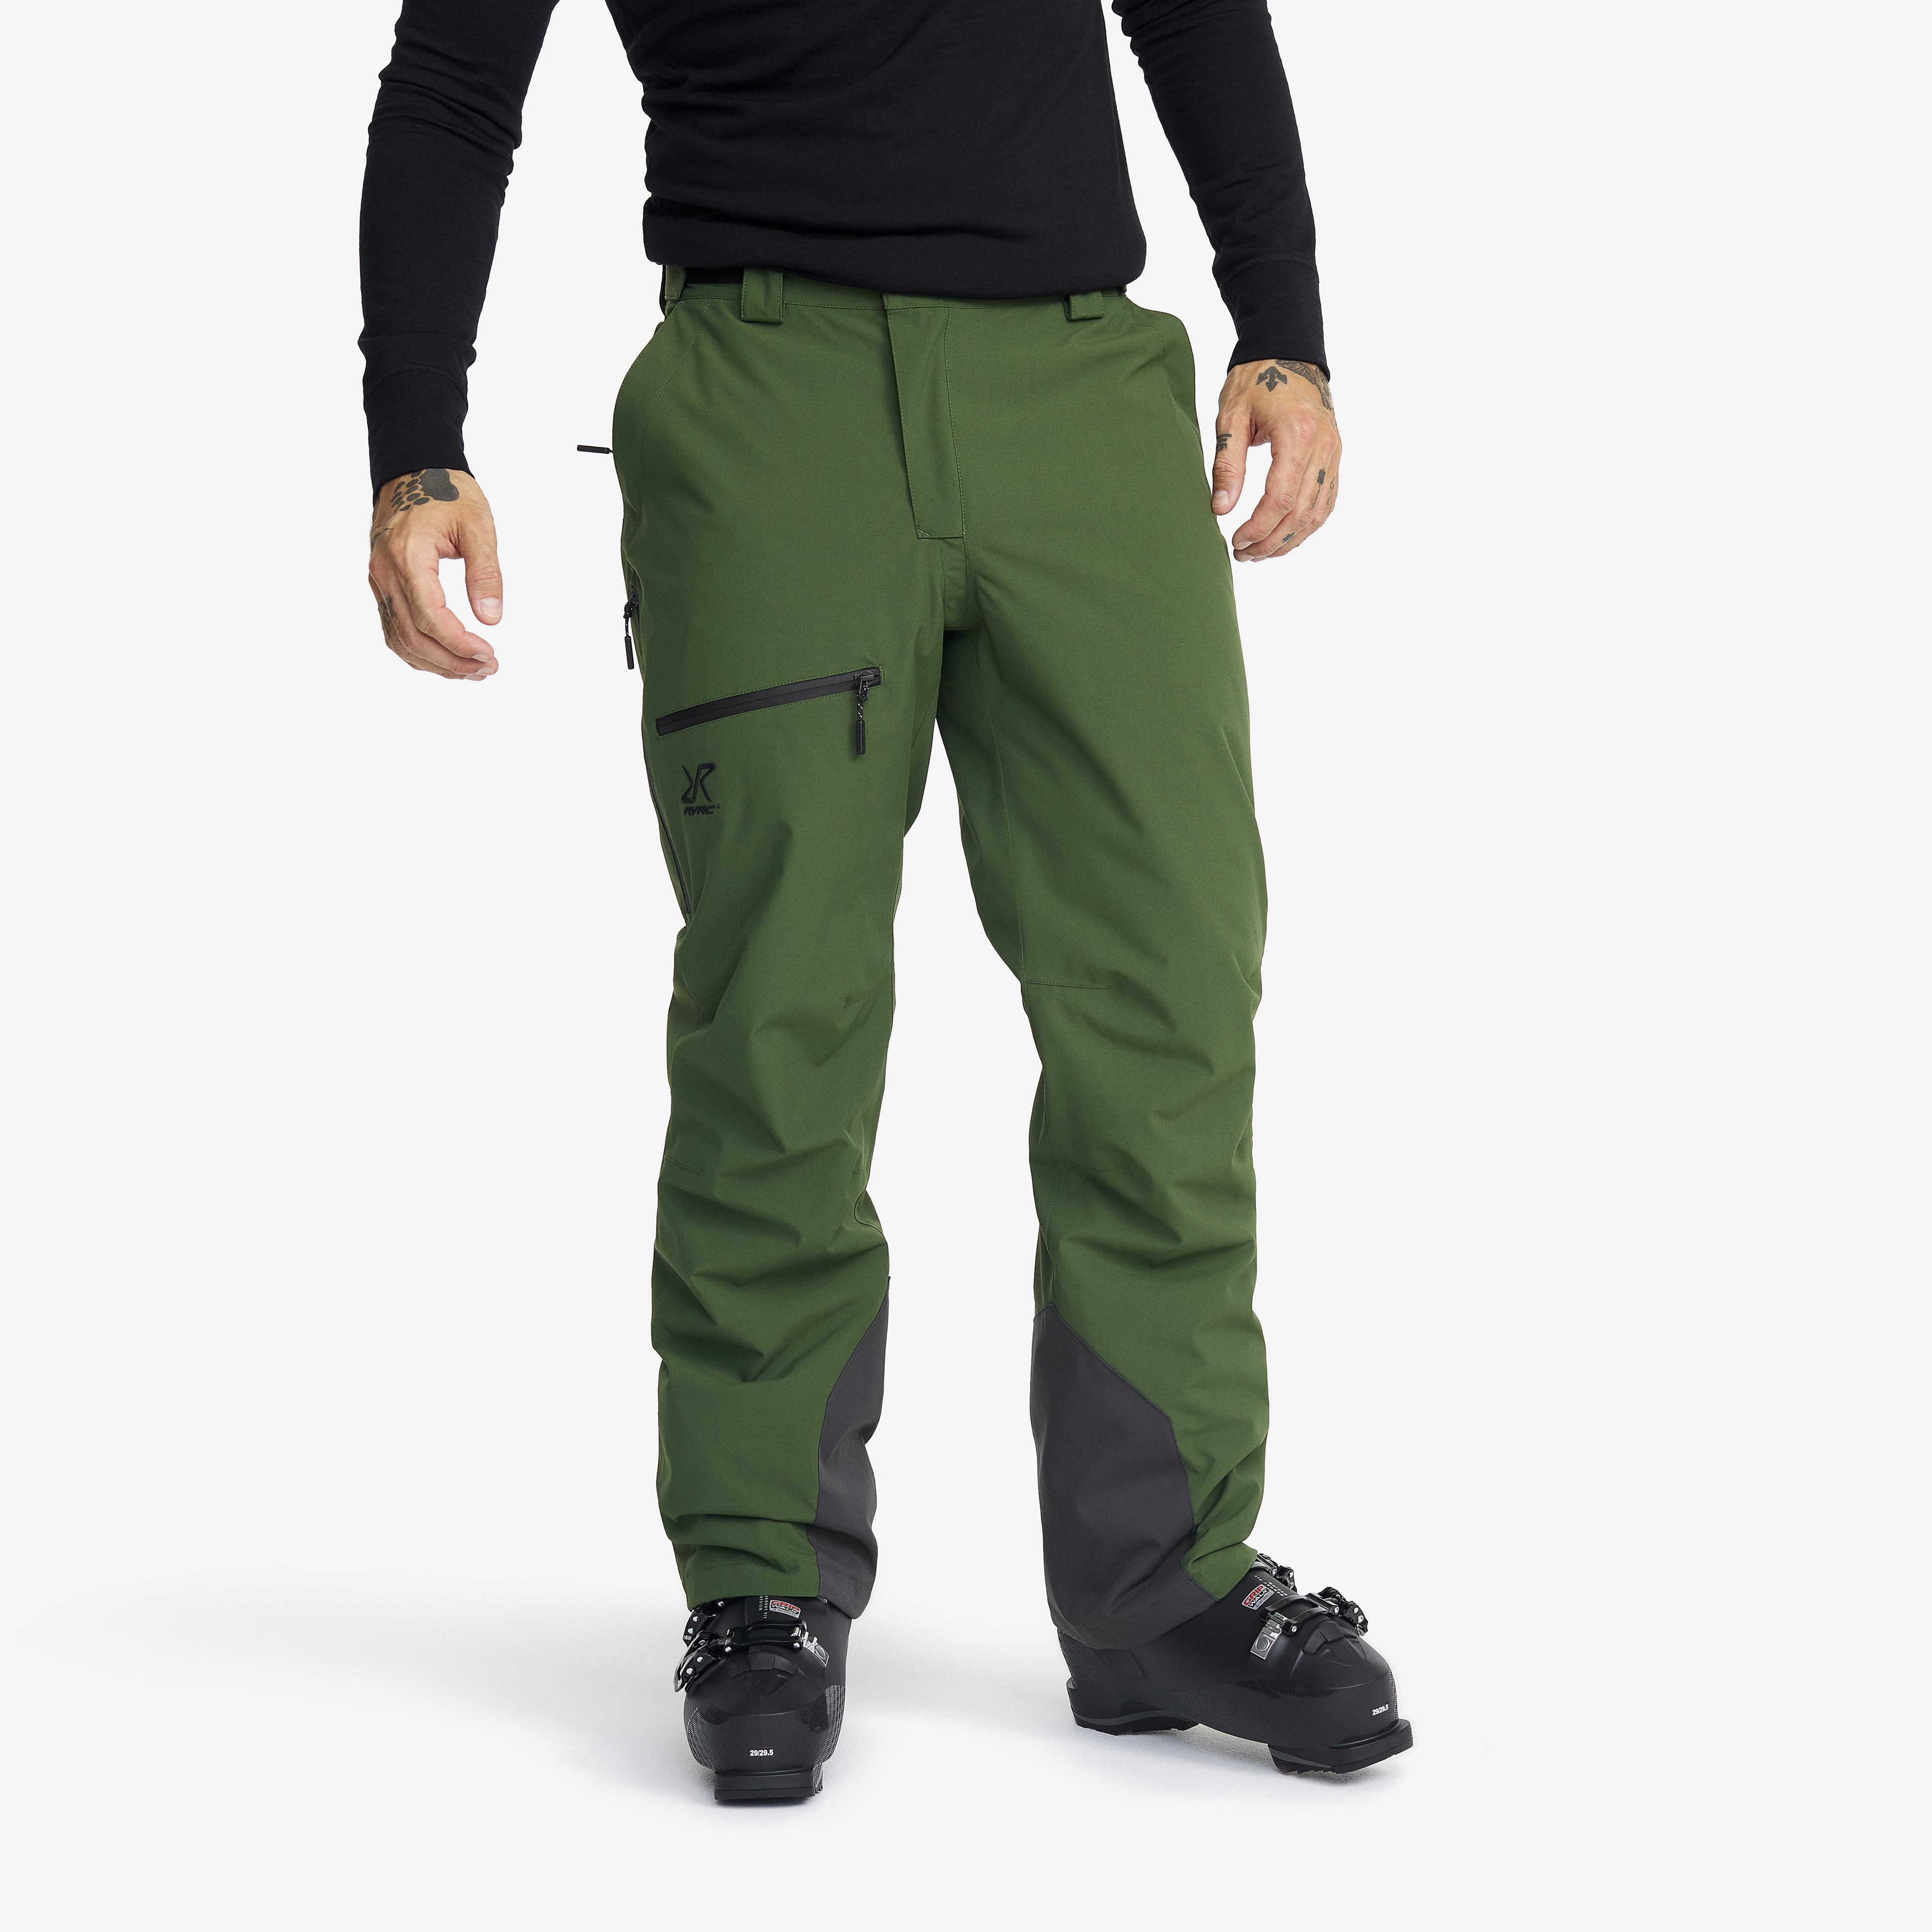 Halo 2L Insulated Snow Pants Black Forest Męskie